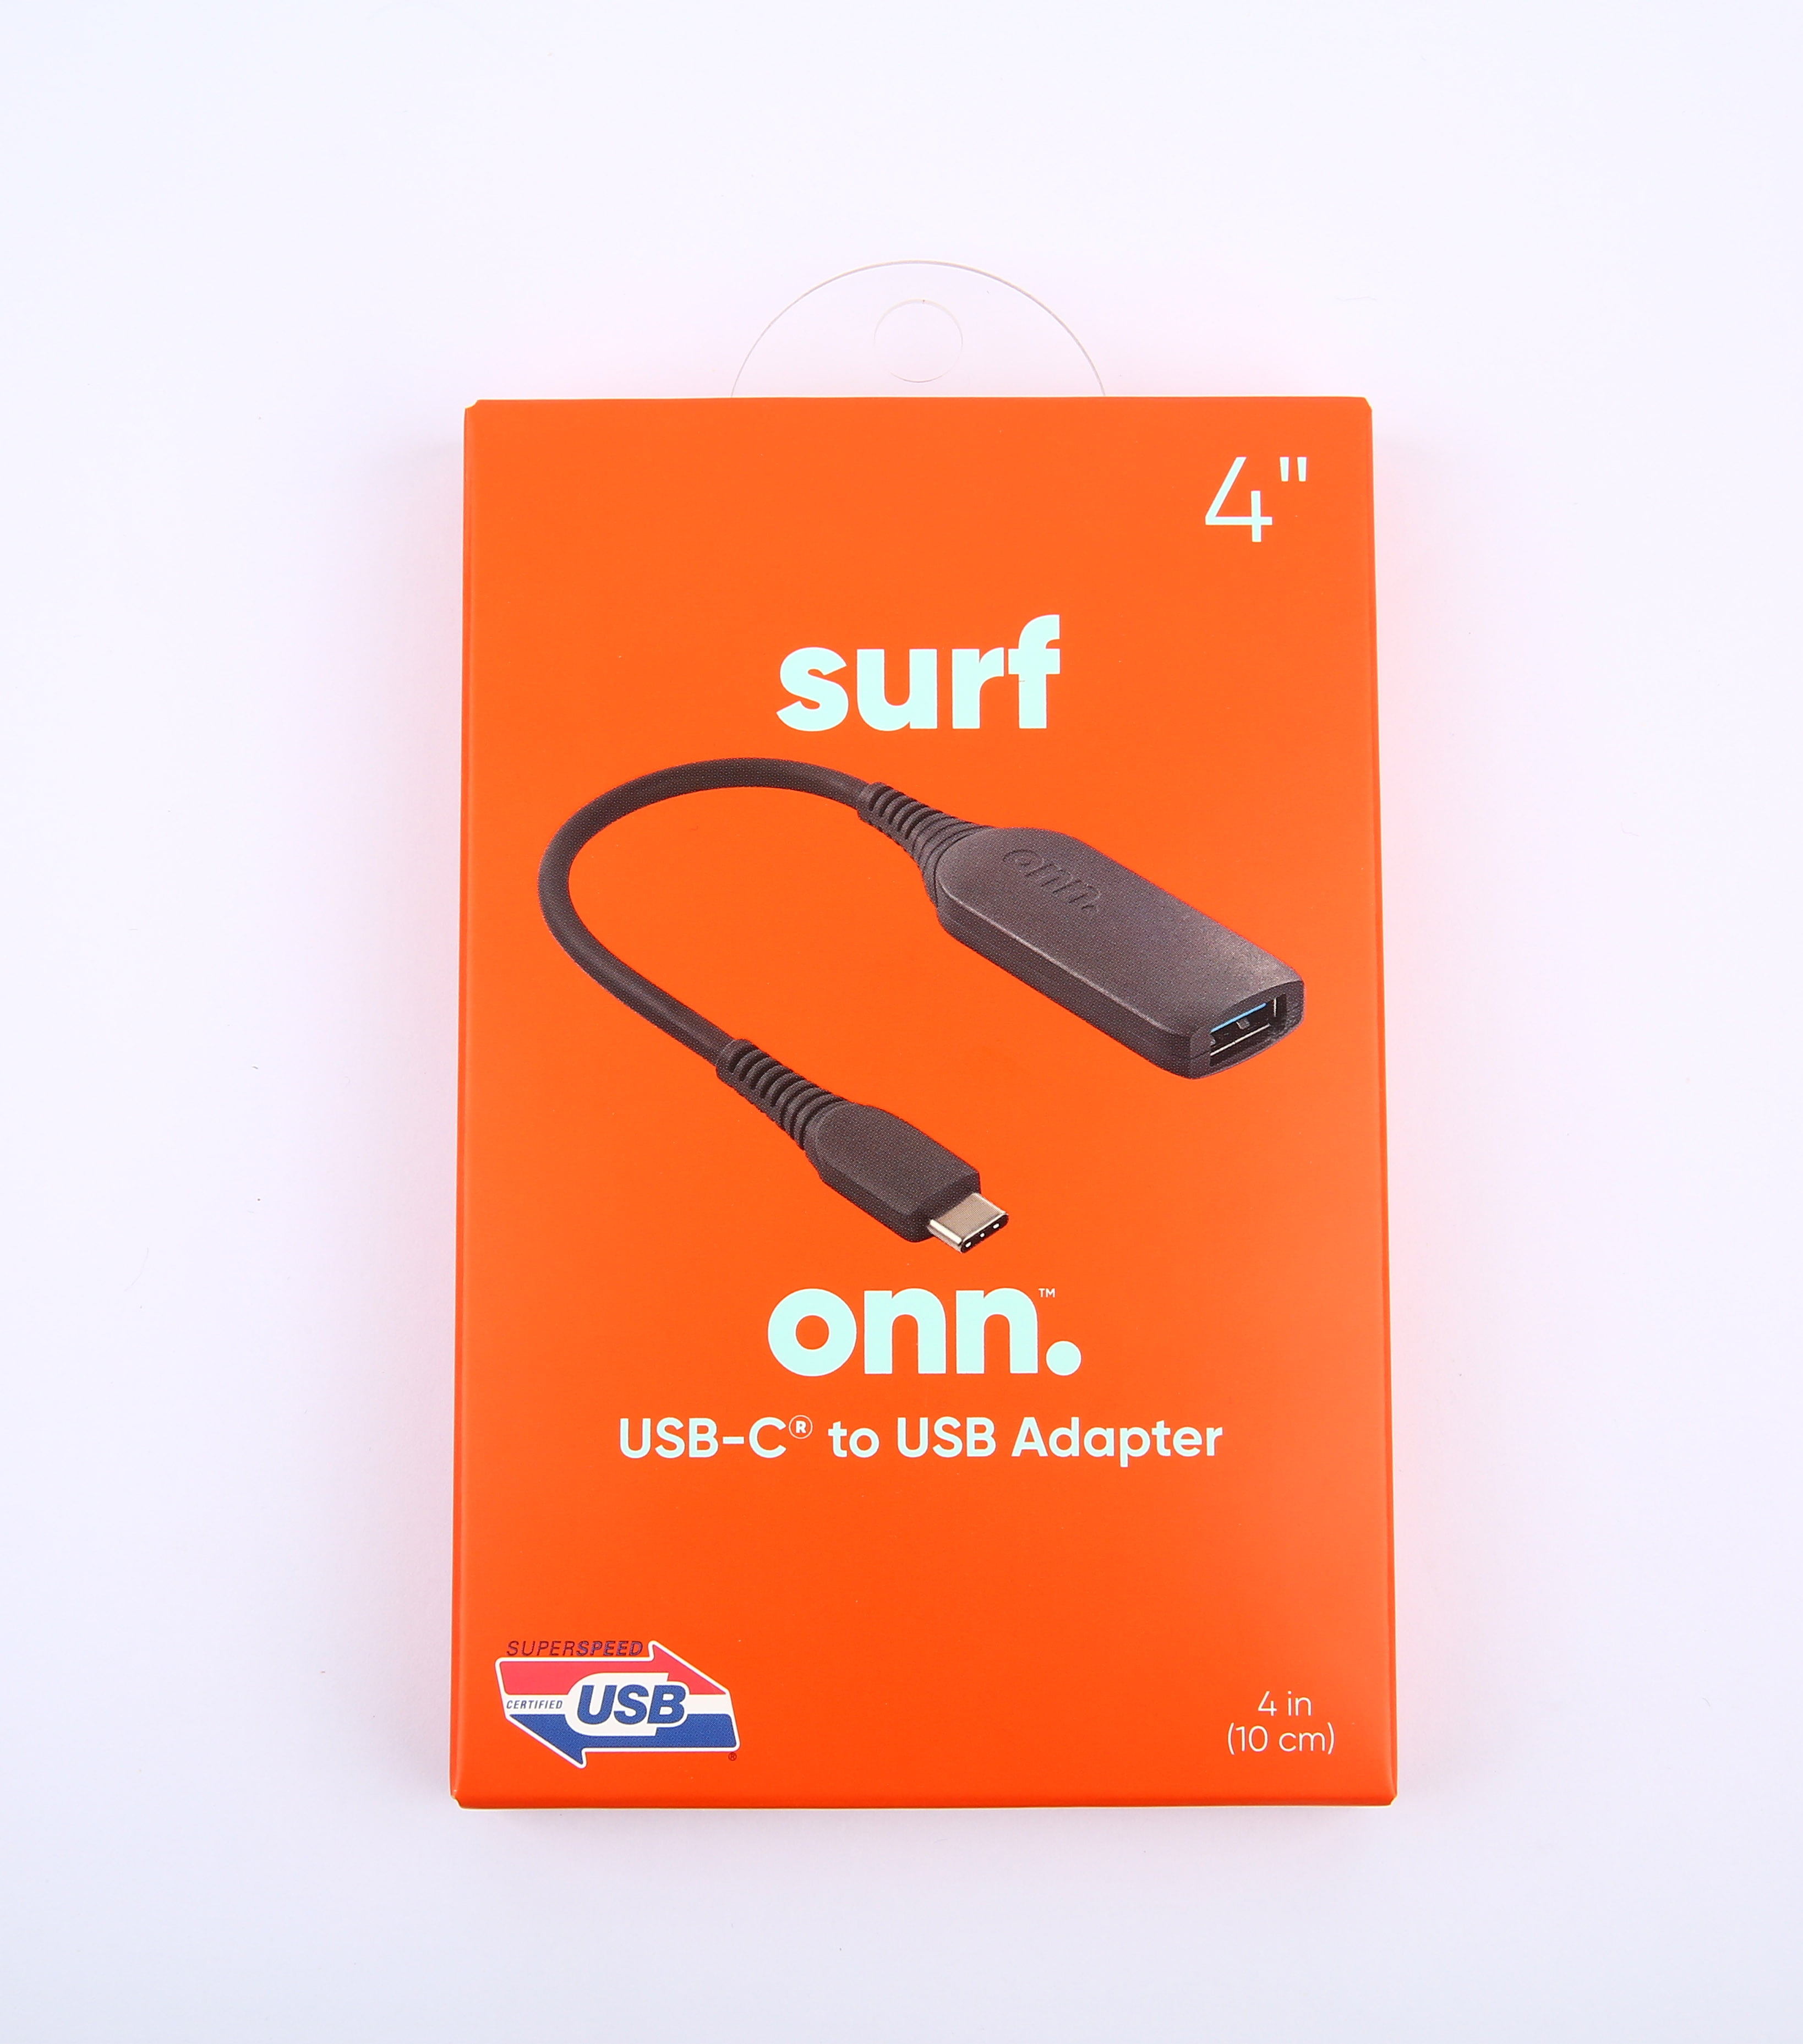 forstene serviet ånd onn. USB-C to USB Female Adapter, 4" Cable, Compliant with USB 3.1 Gen 1  and Supports Data Transfer up To 5 Gbps - Walmart.com